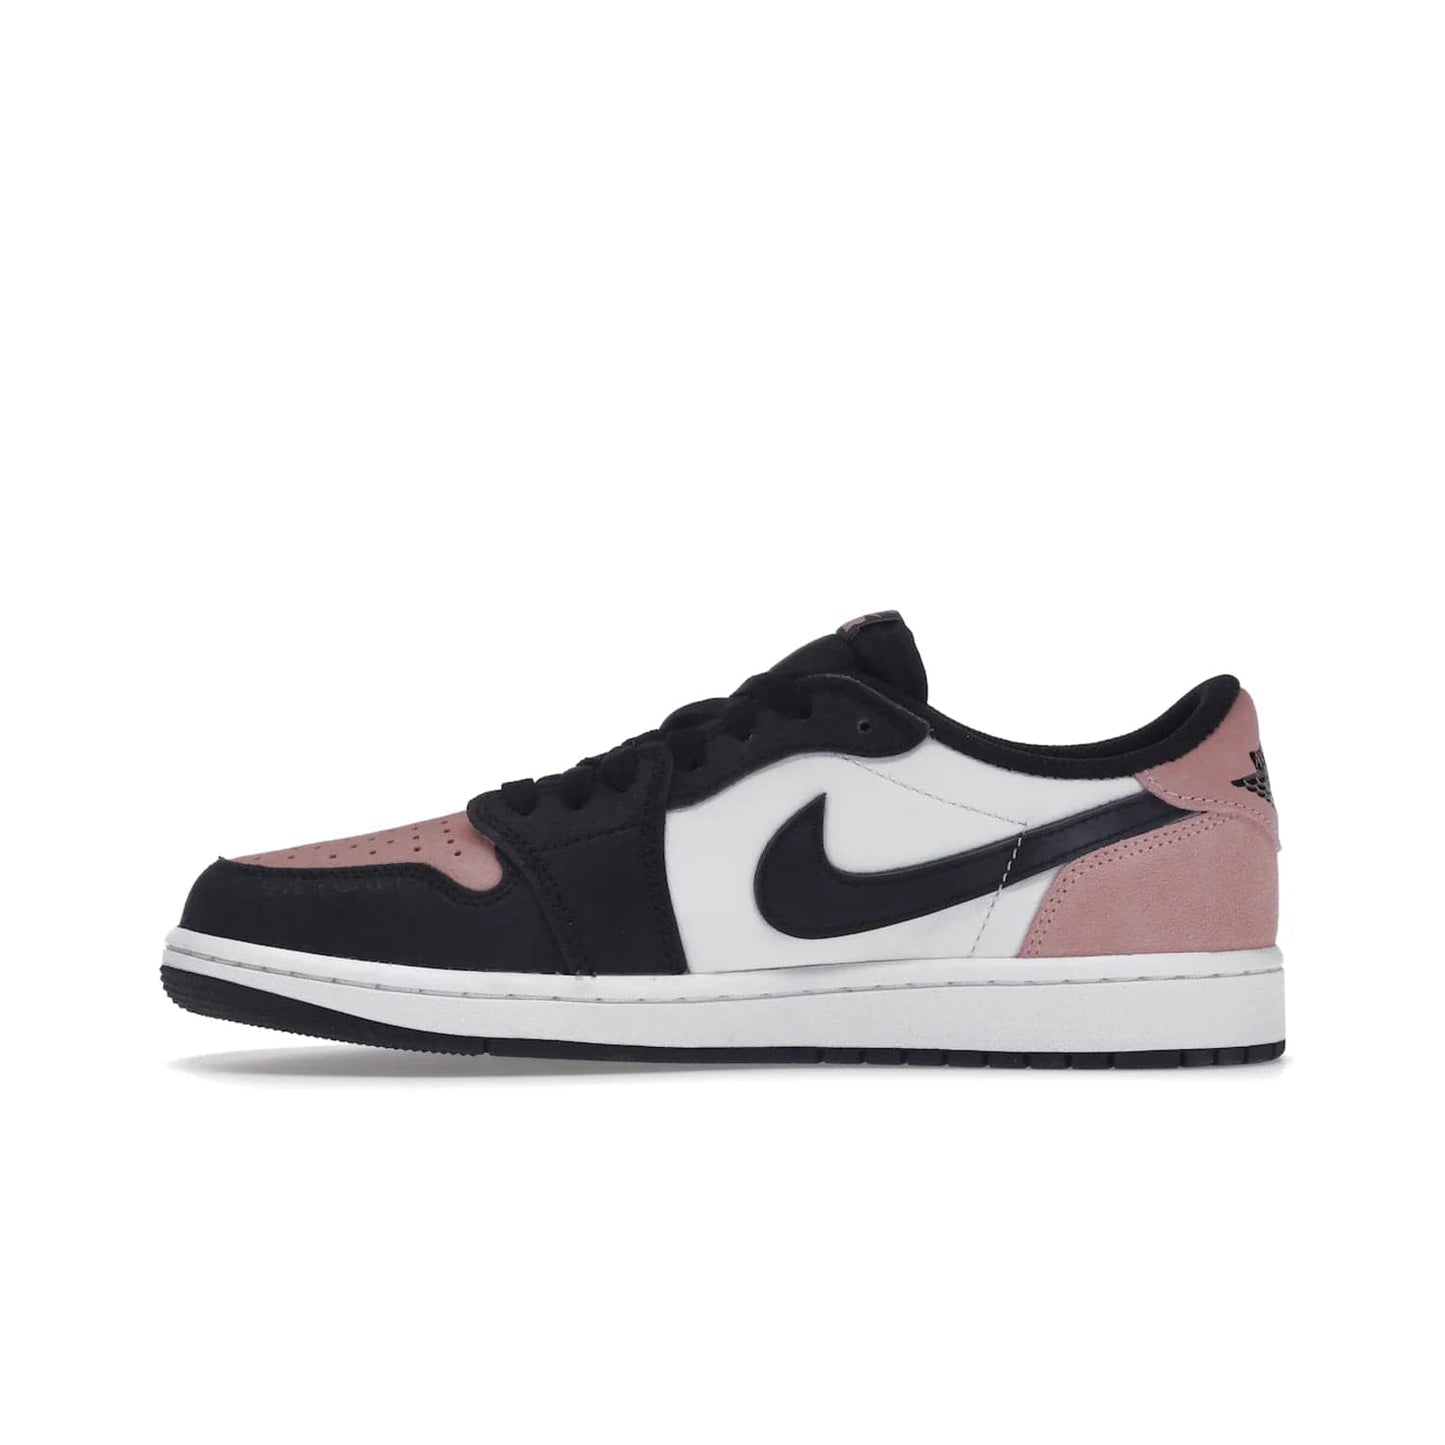 Jordan 1 Low OG Bleached Coral - Image 19 - Only at www.BallersClubKickz.com - Introducing the Air Jordan 1 Low OG Bleached Coral. Constructed with white leather, black cracked leather & Bleached Coral suede. Signature Jordan Wings logo, white Air sole. Get the pack in July 2022 and stand out.